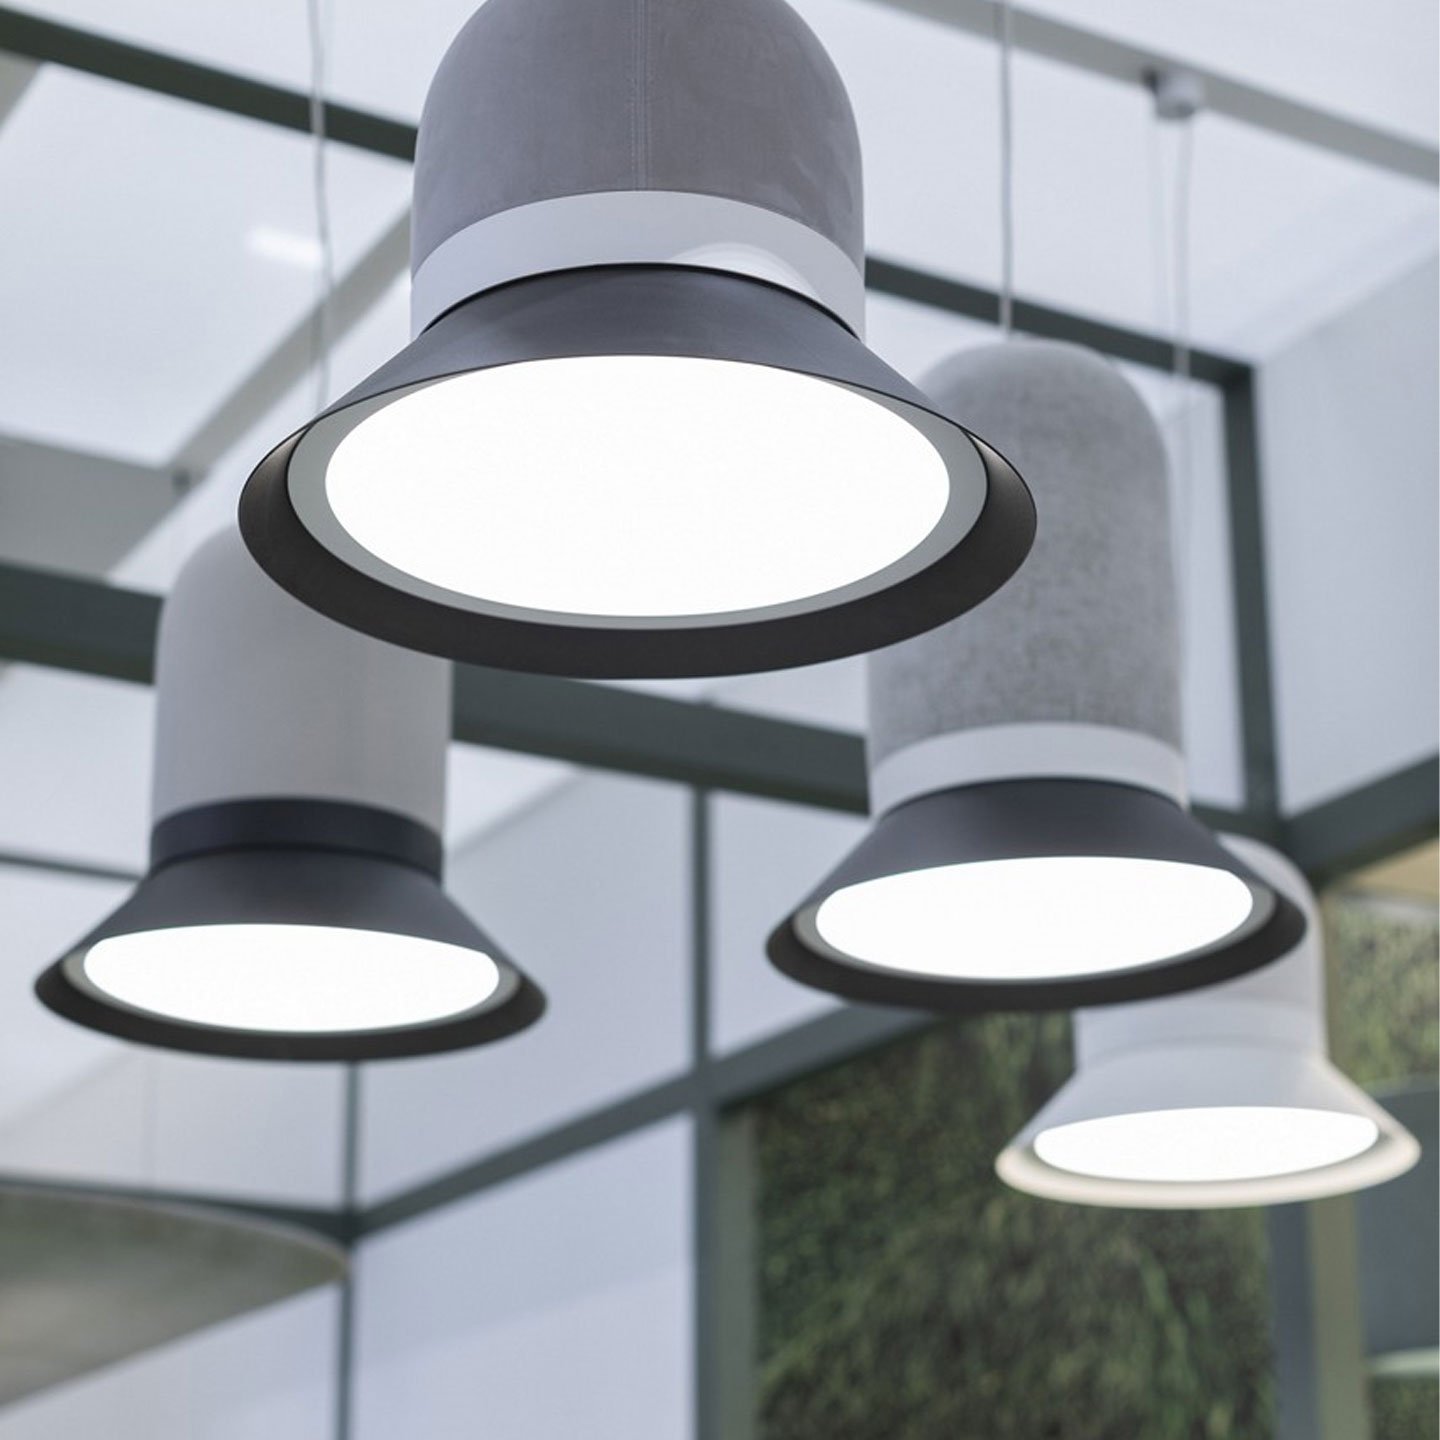 Haworth BuzziHat Lighting with grey felt top and black steel disc hanging from an office ceiling